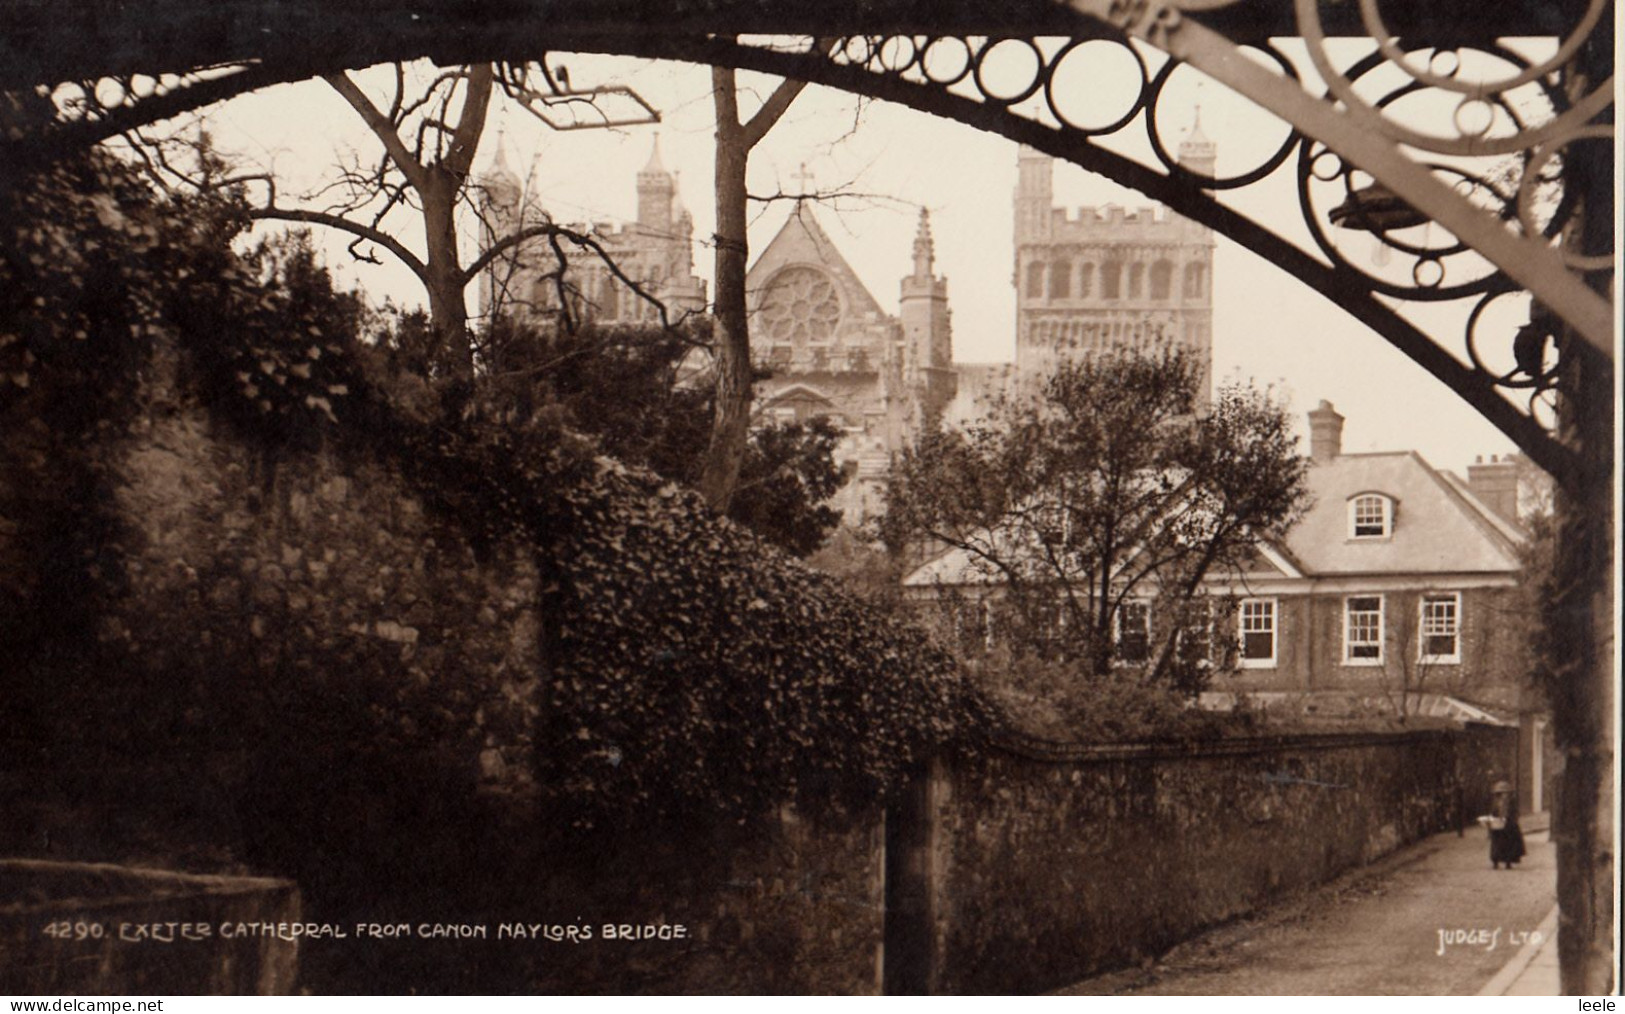 CA08. Vintage Postcard. Exeter Cathedral From Canon Naylor;'s Bridge, Devon - Exeter